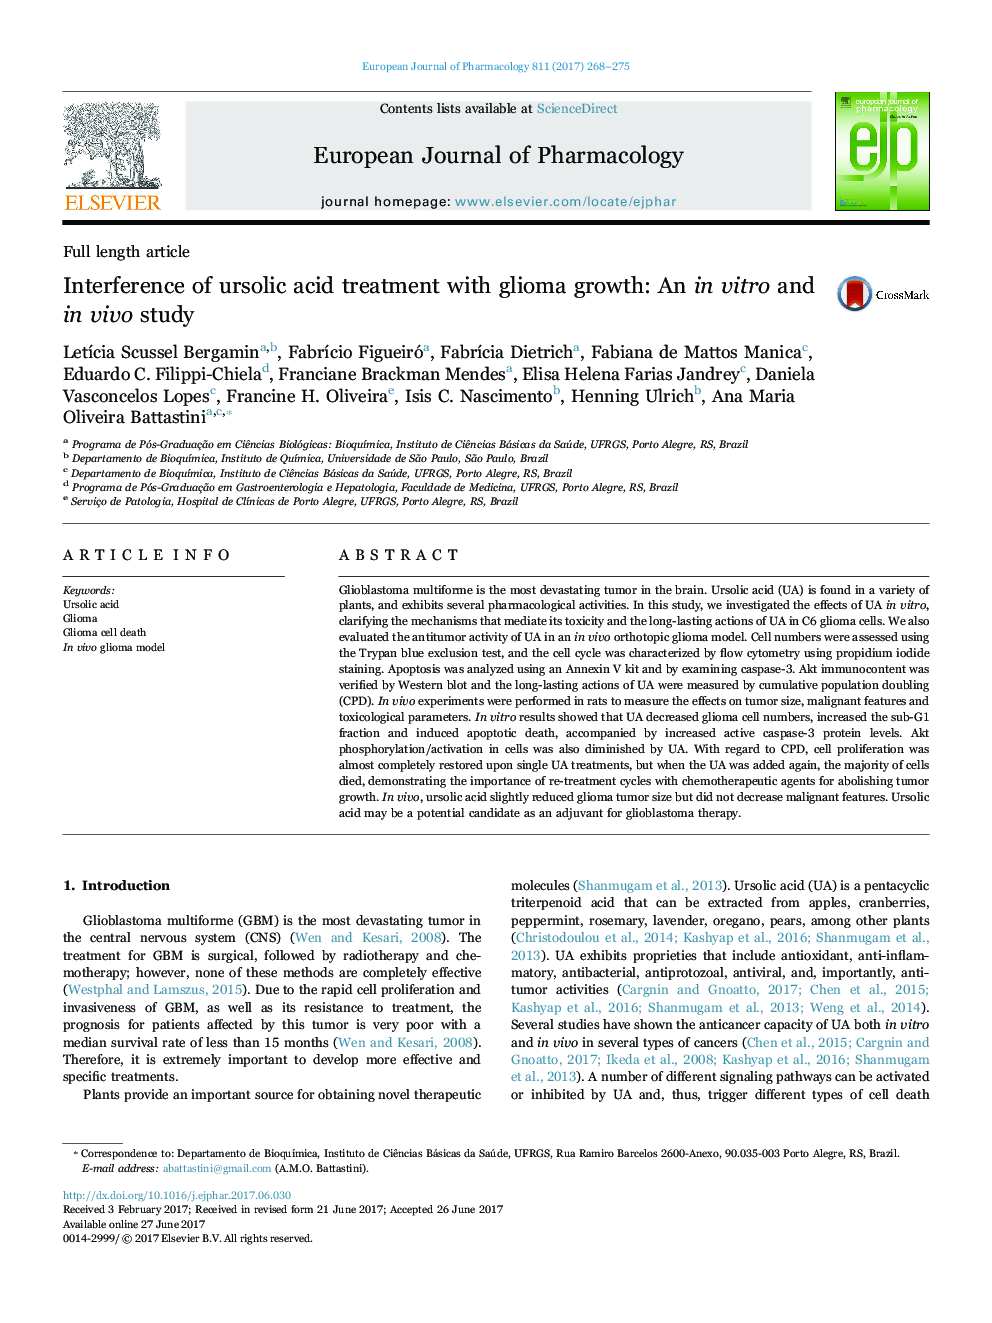 Interference of ursolic acid treatment with glioma growth: An in vitro and in vivo study